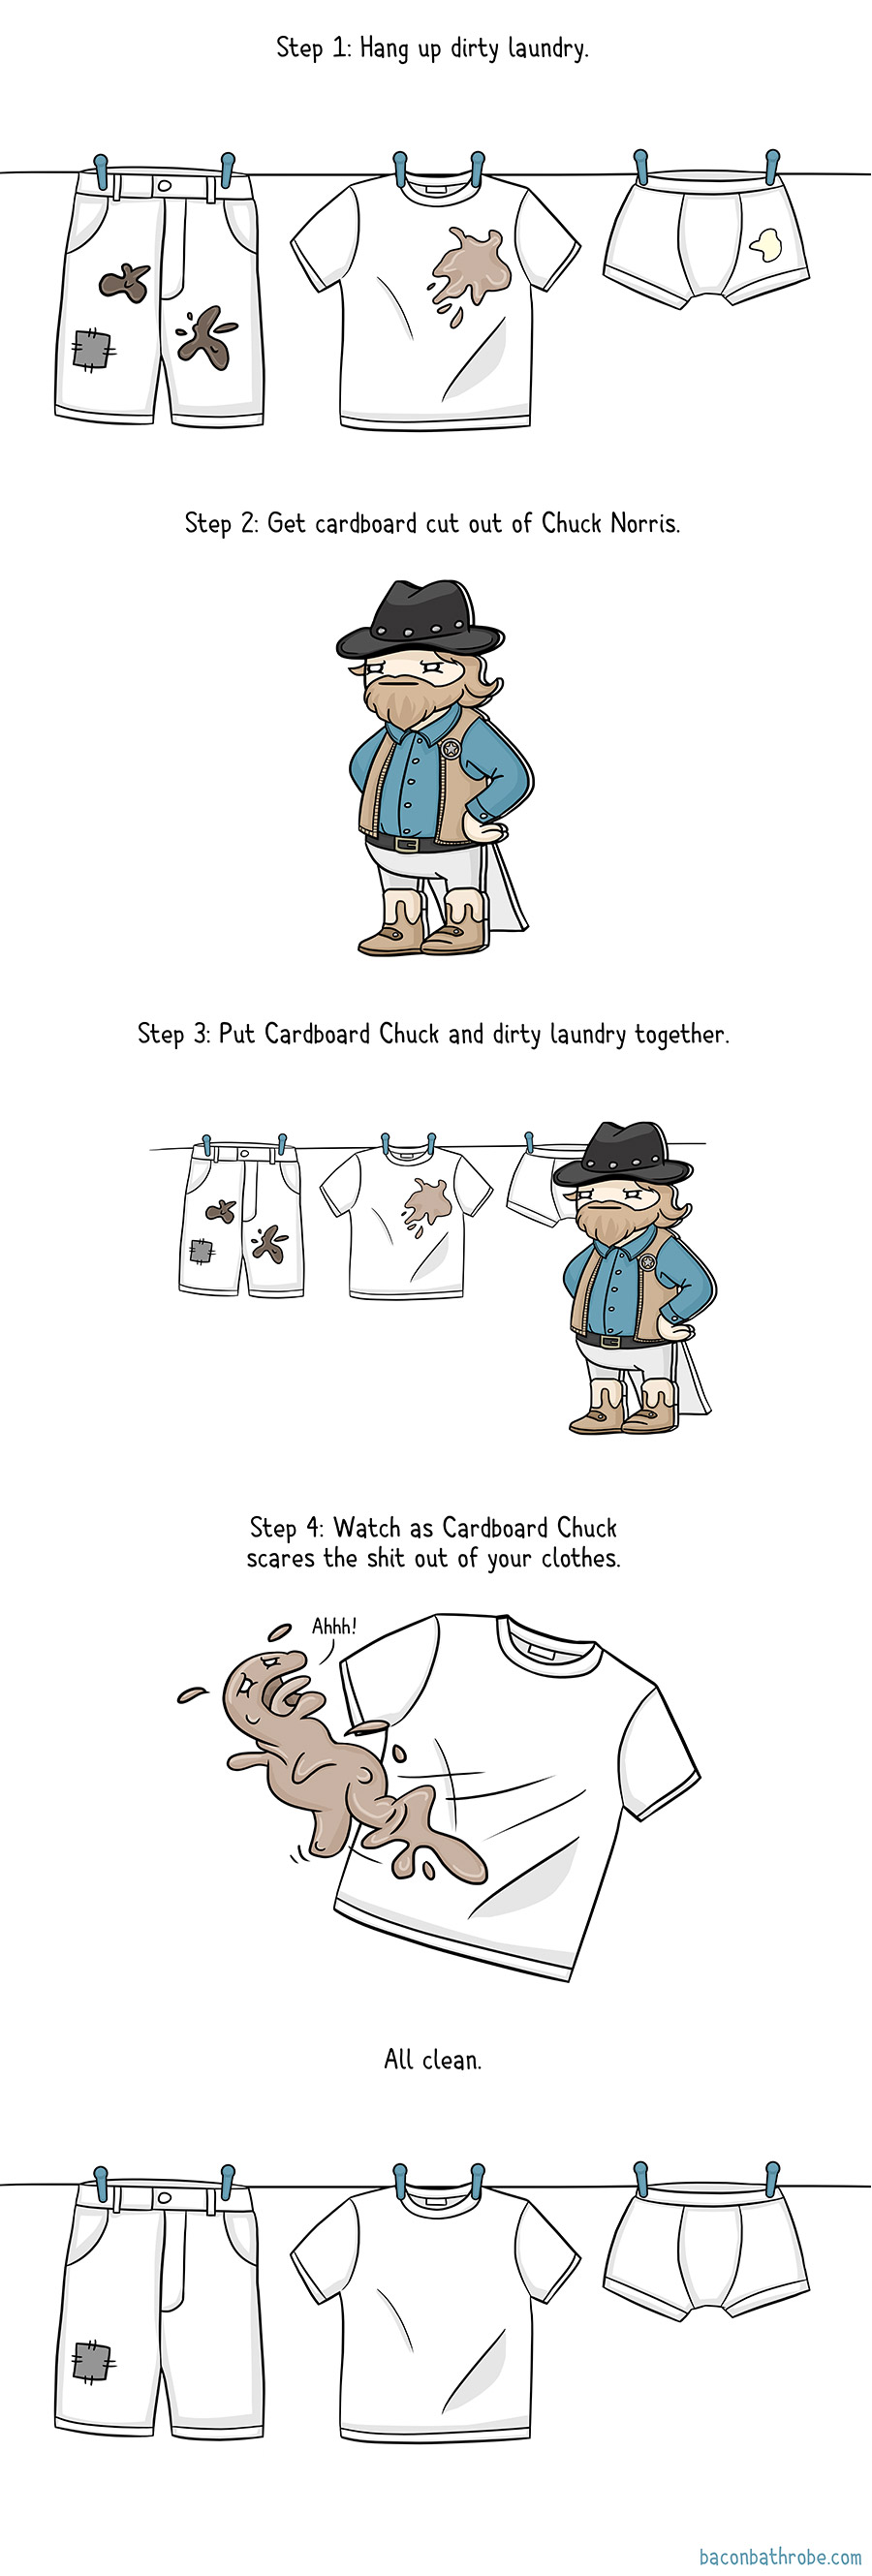 How to clean your laundry